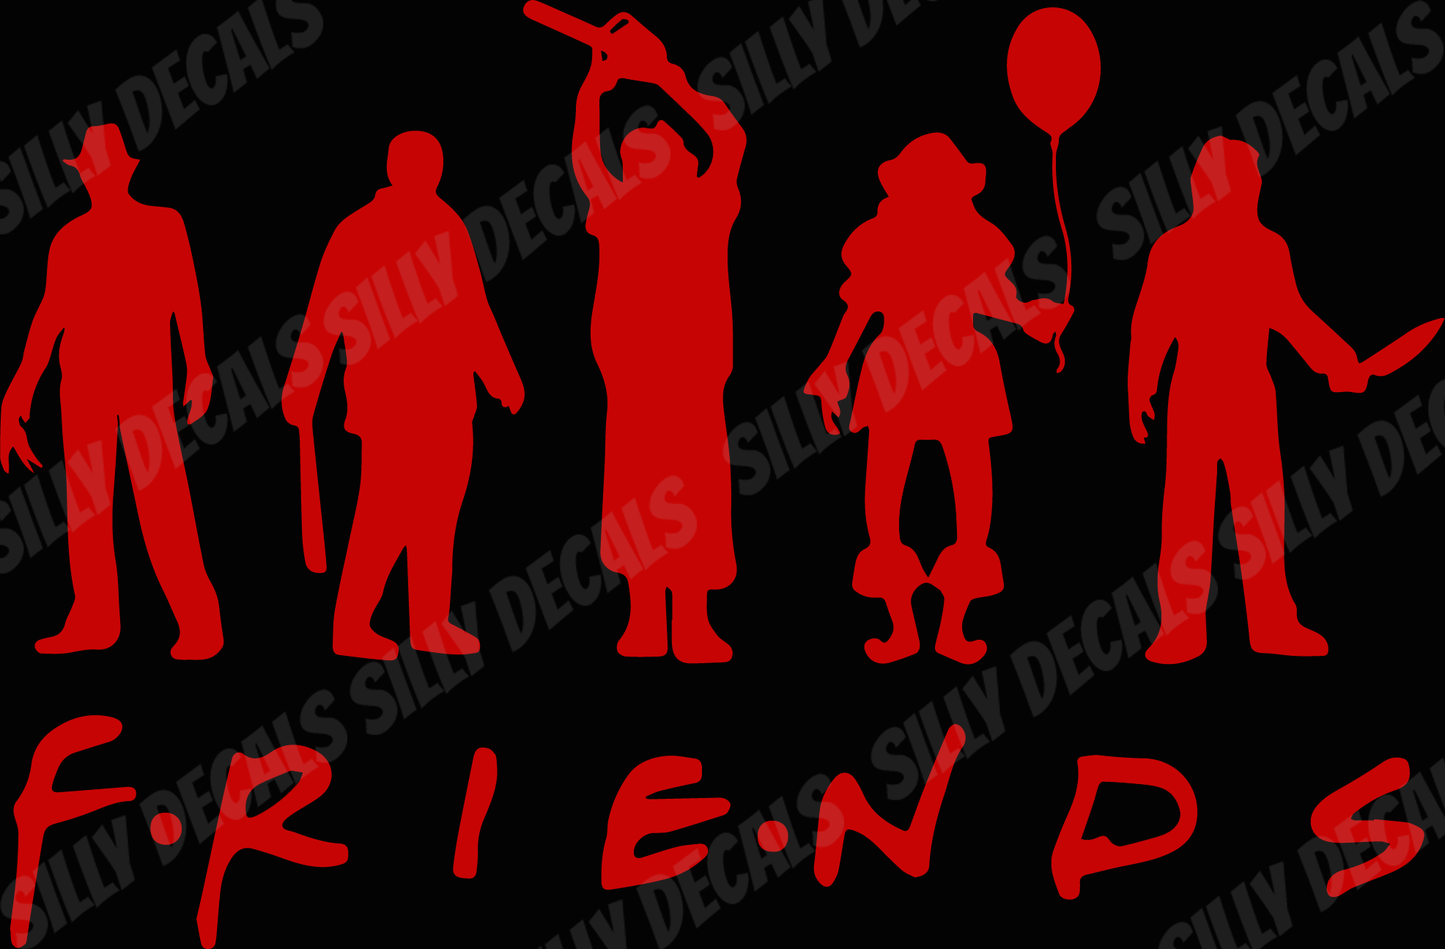 Halloween Killer Friends; Scary Halloween Horror Vinyl Decals Suitable For Cars, Windows, Walls, and More!